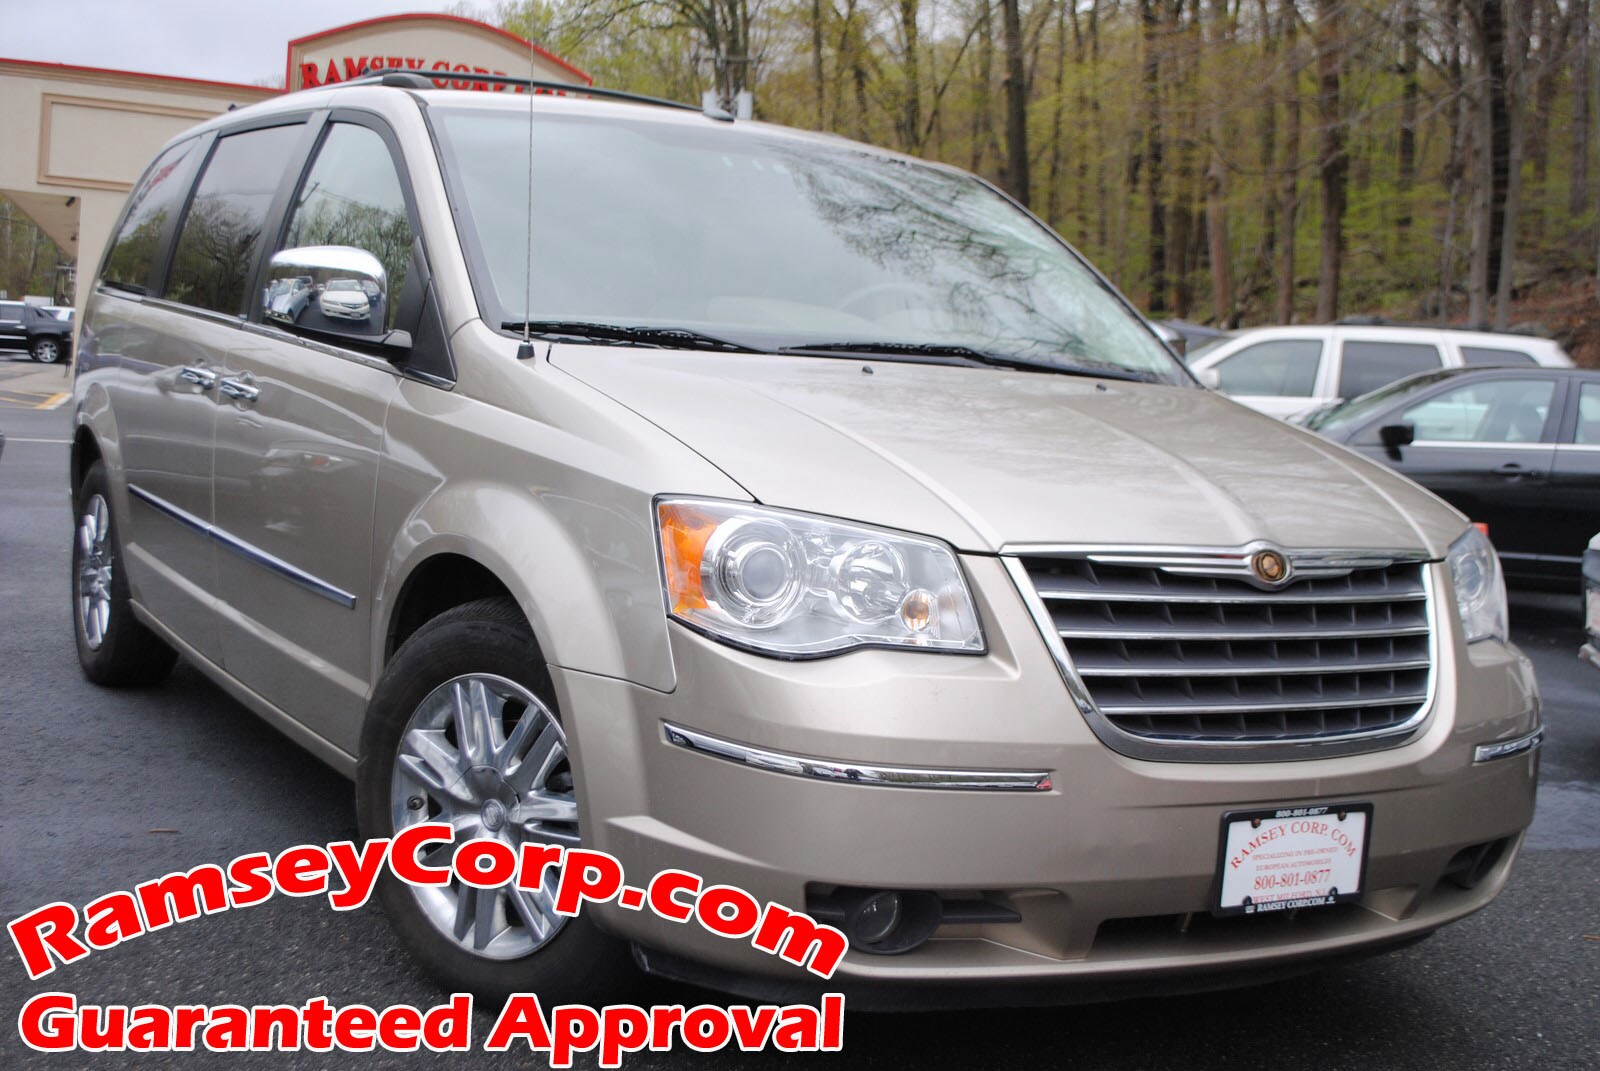 Used 2008 Chrysler Town  Country For Sale at Ramsey Corp. VIN:  2A8HR64X08R149781